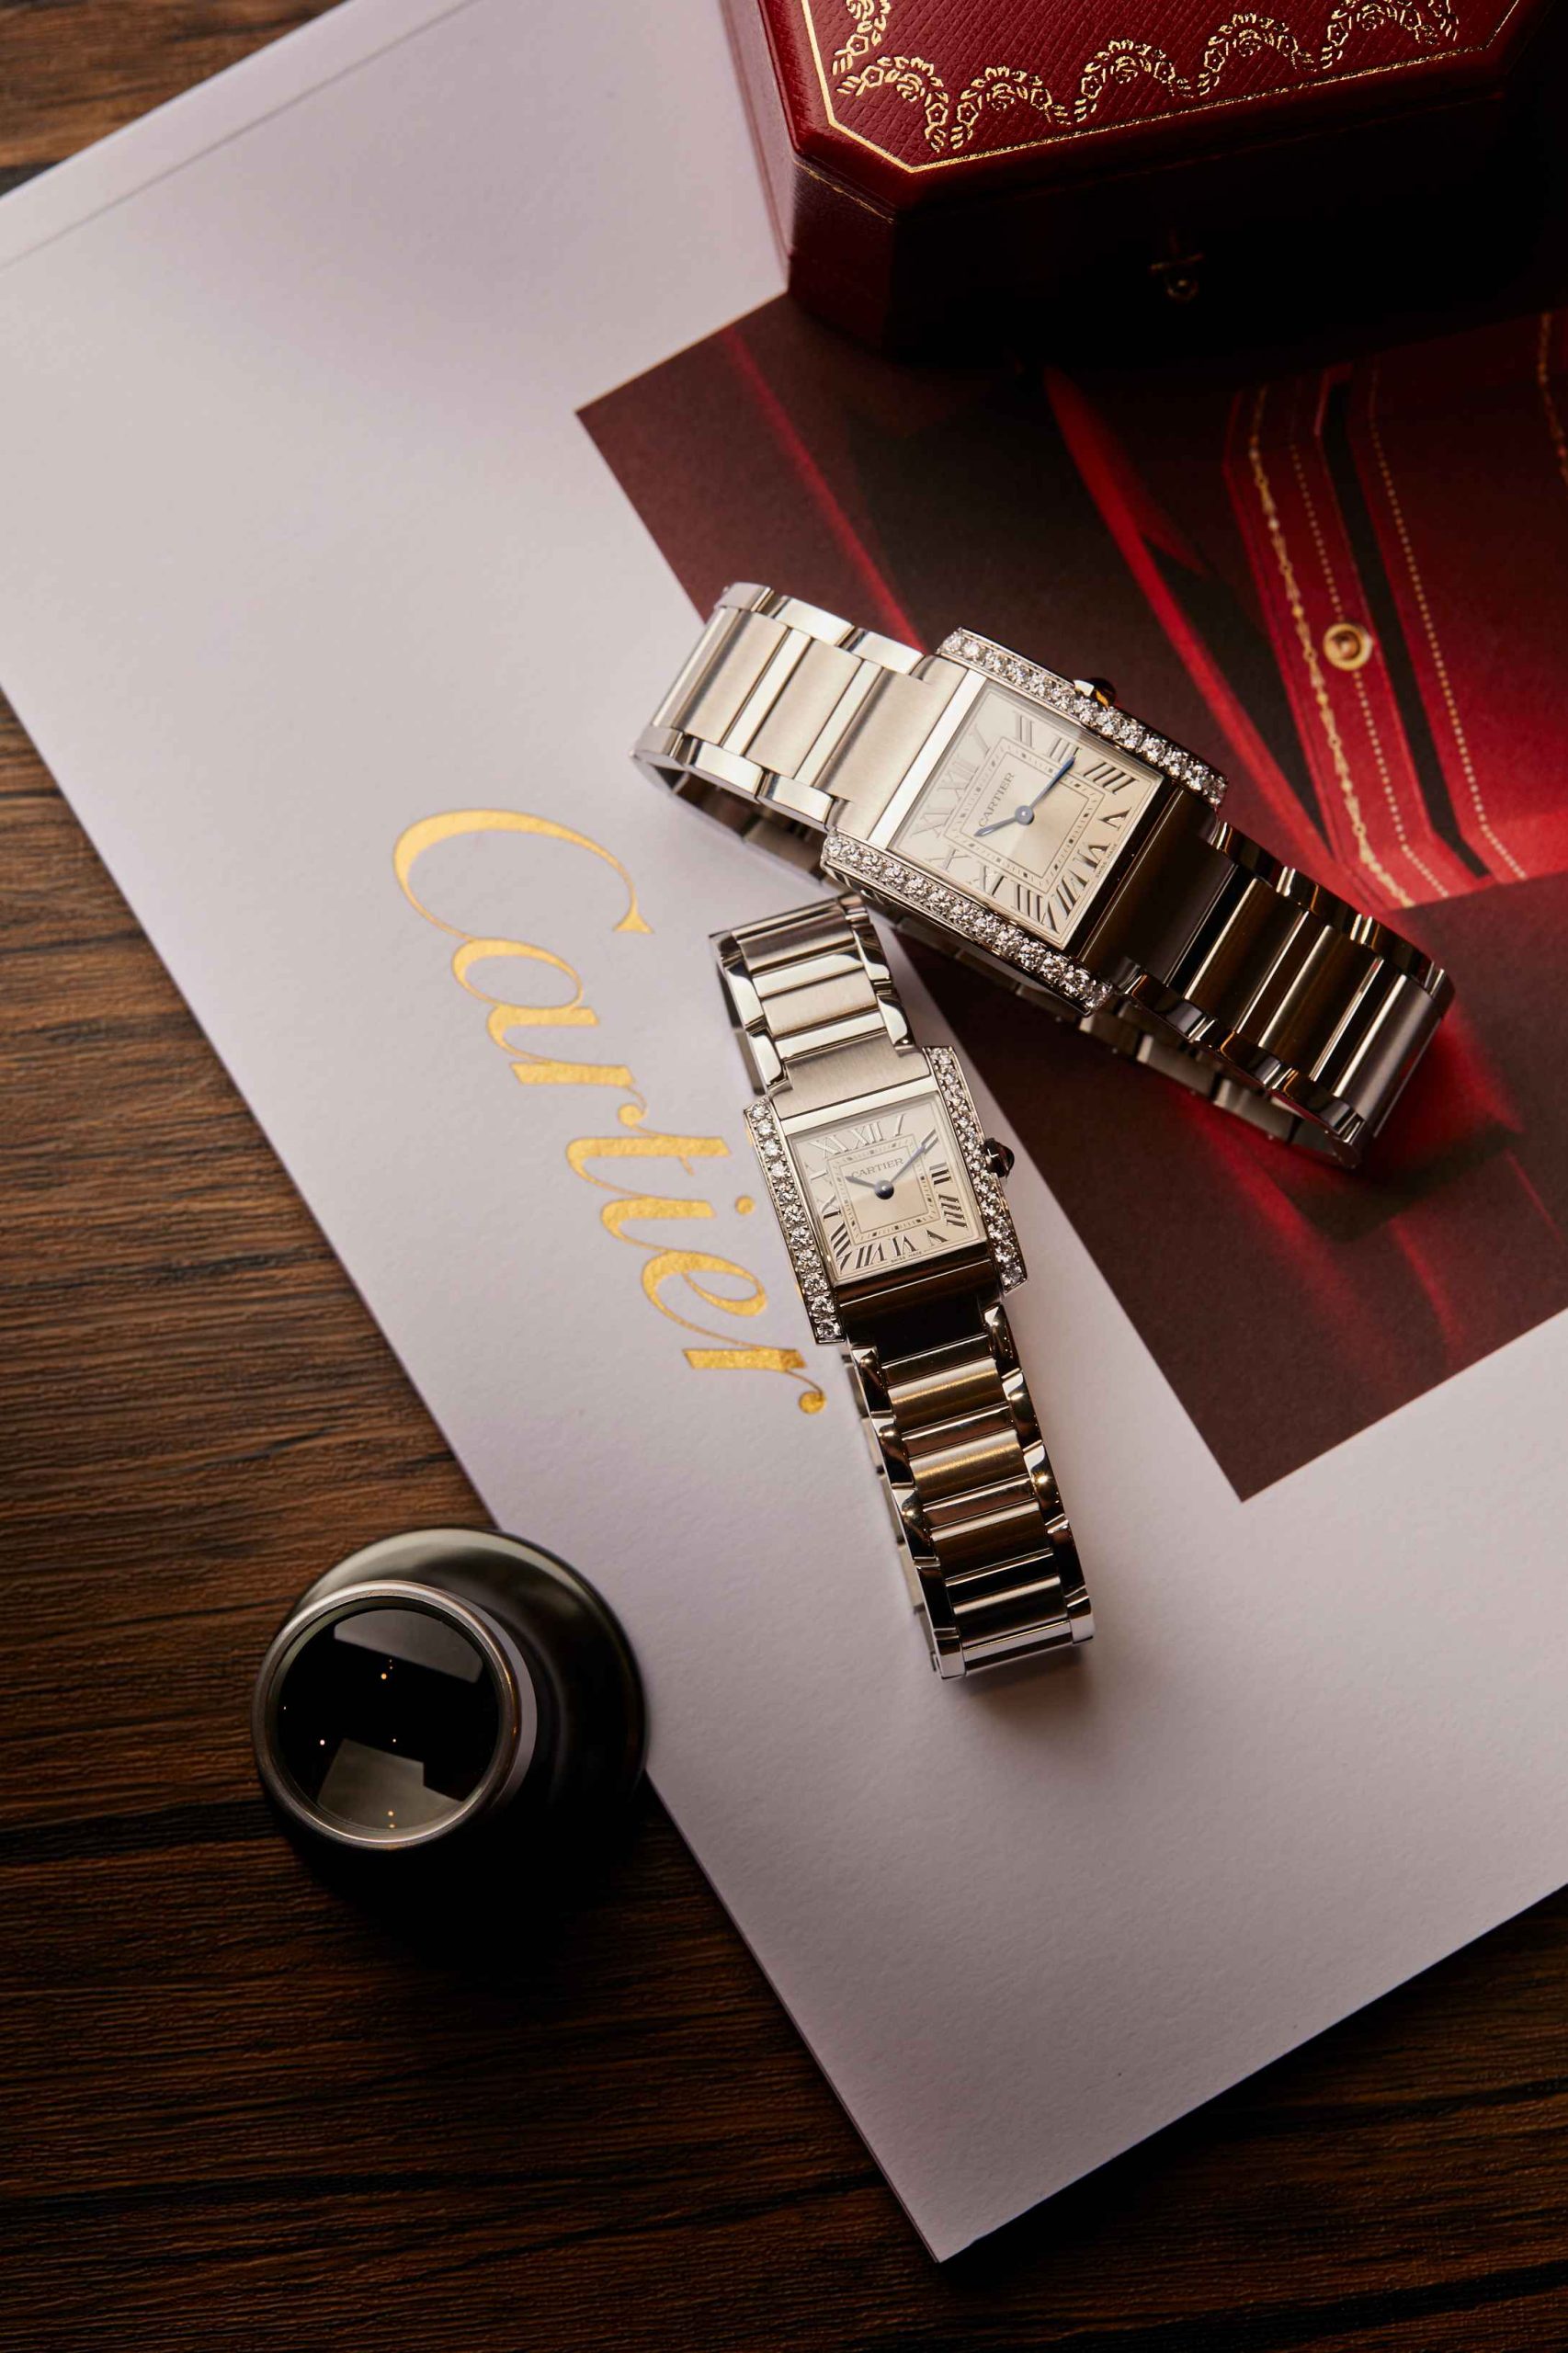 Cartier255 2 11zon Scaled